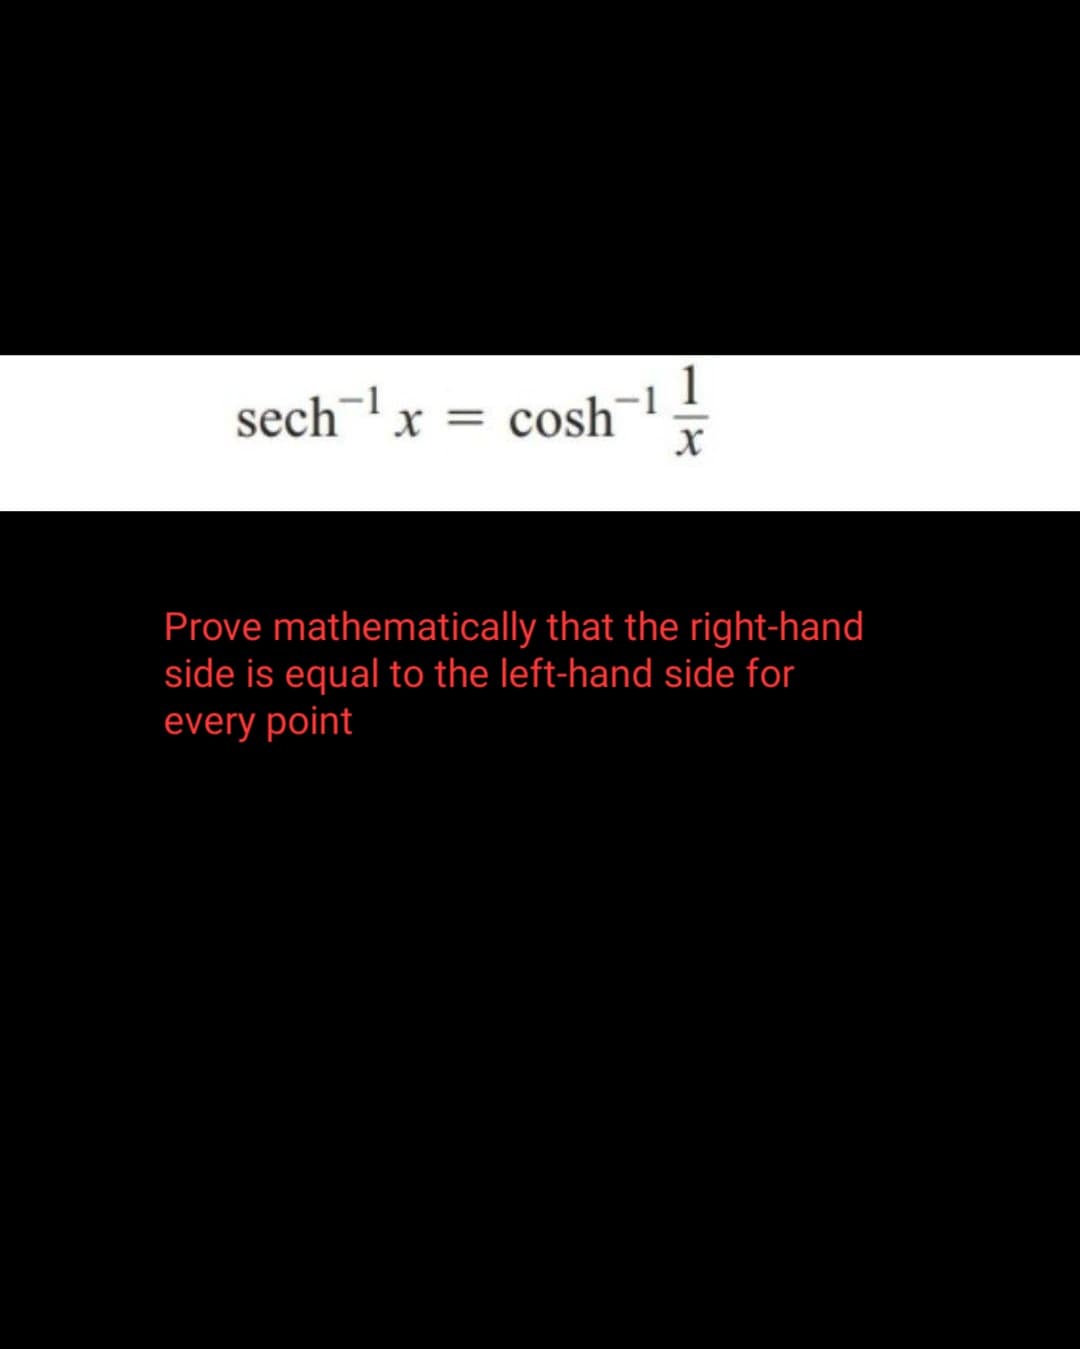 sech¹ x = cosh
X
Prove mathematically that the right-hand
side is equal to the left-hand side for
every point